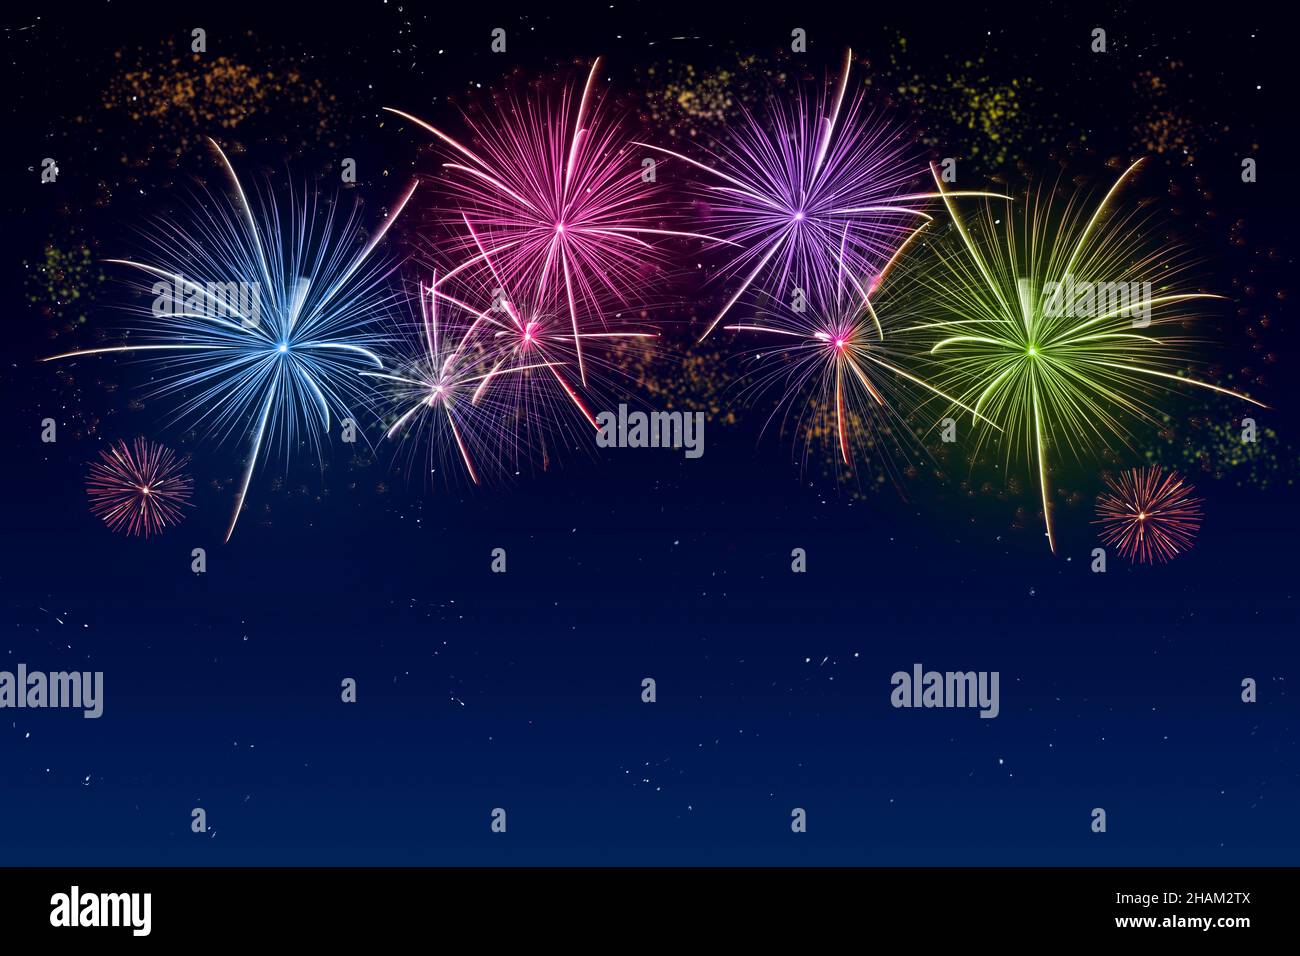 Colorful fireworks celebration and the twilight sky background with copyspace at the bottom of image. Stock Photo